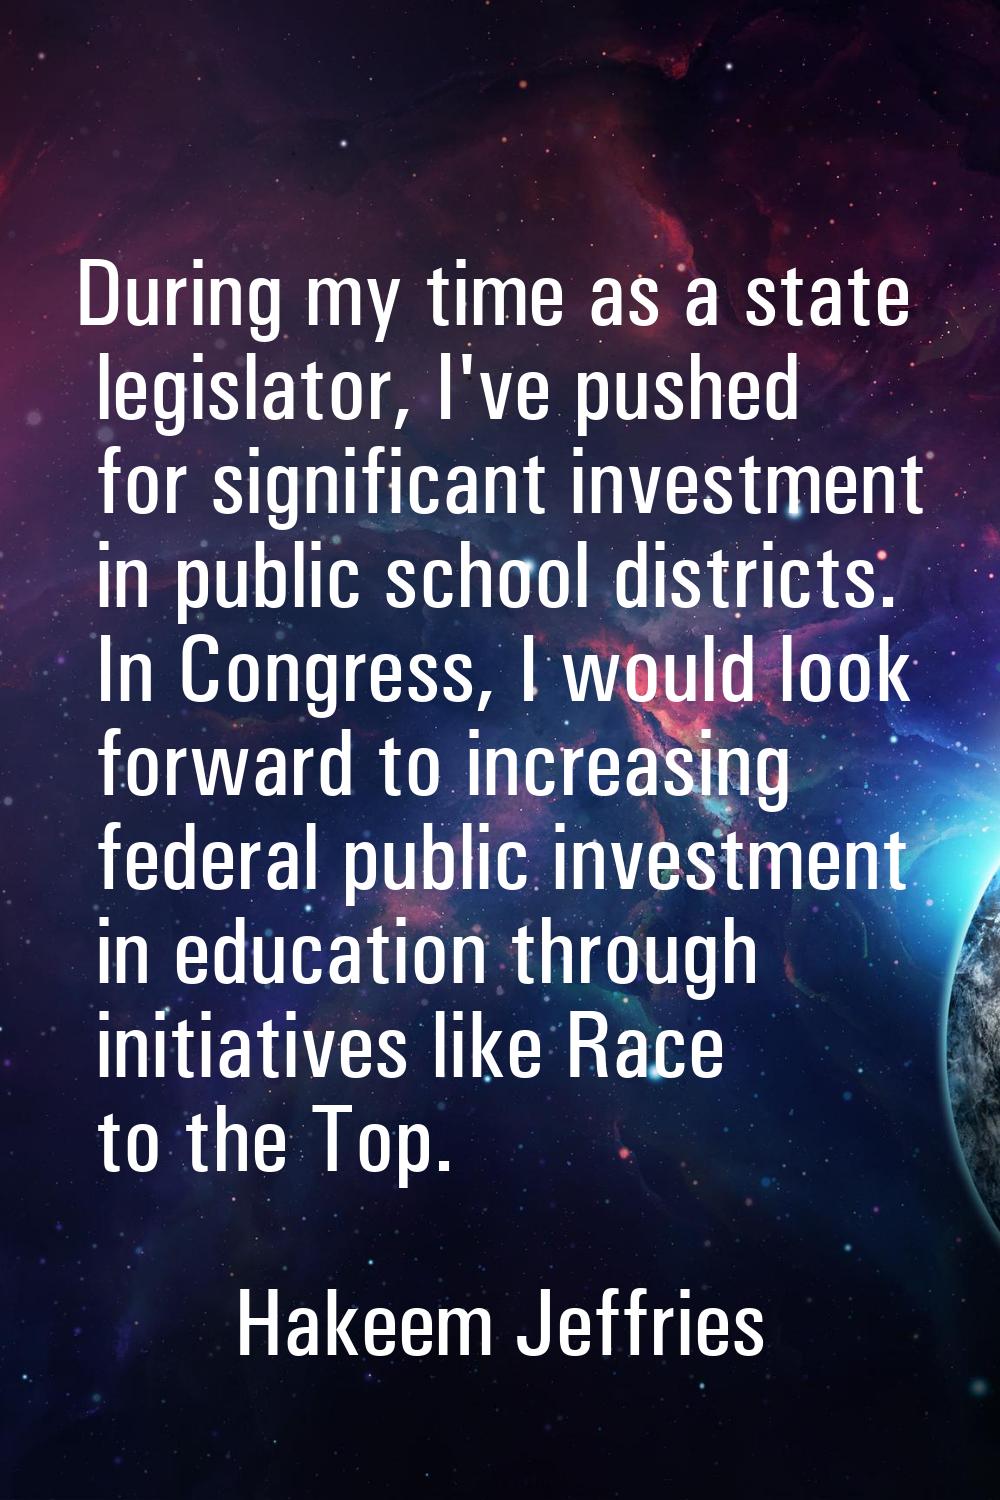 During my time as a state legislator, I've pushed for significant investment in public school distr